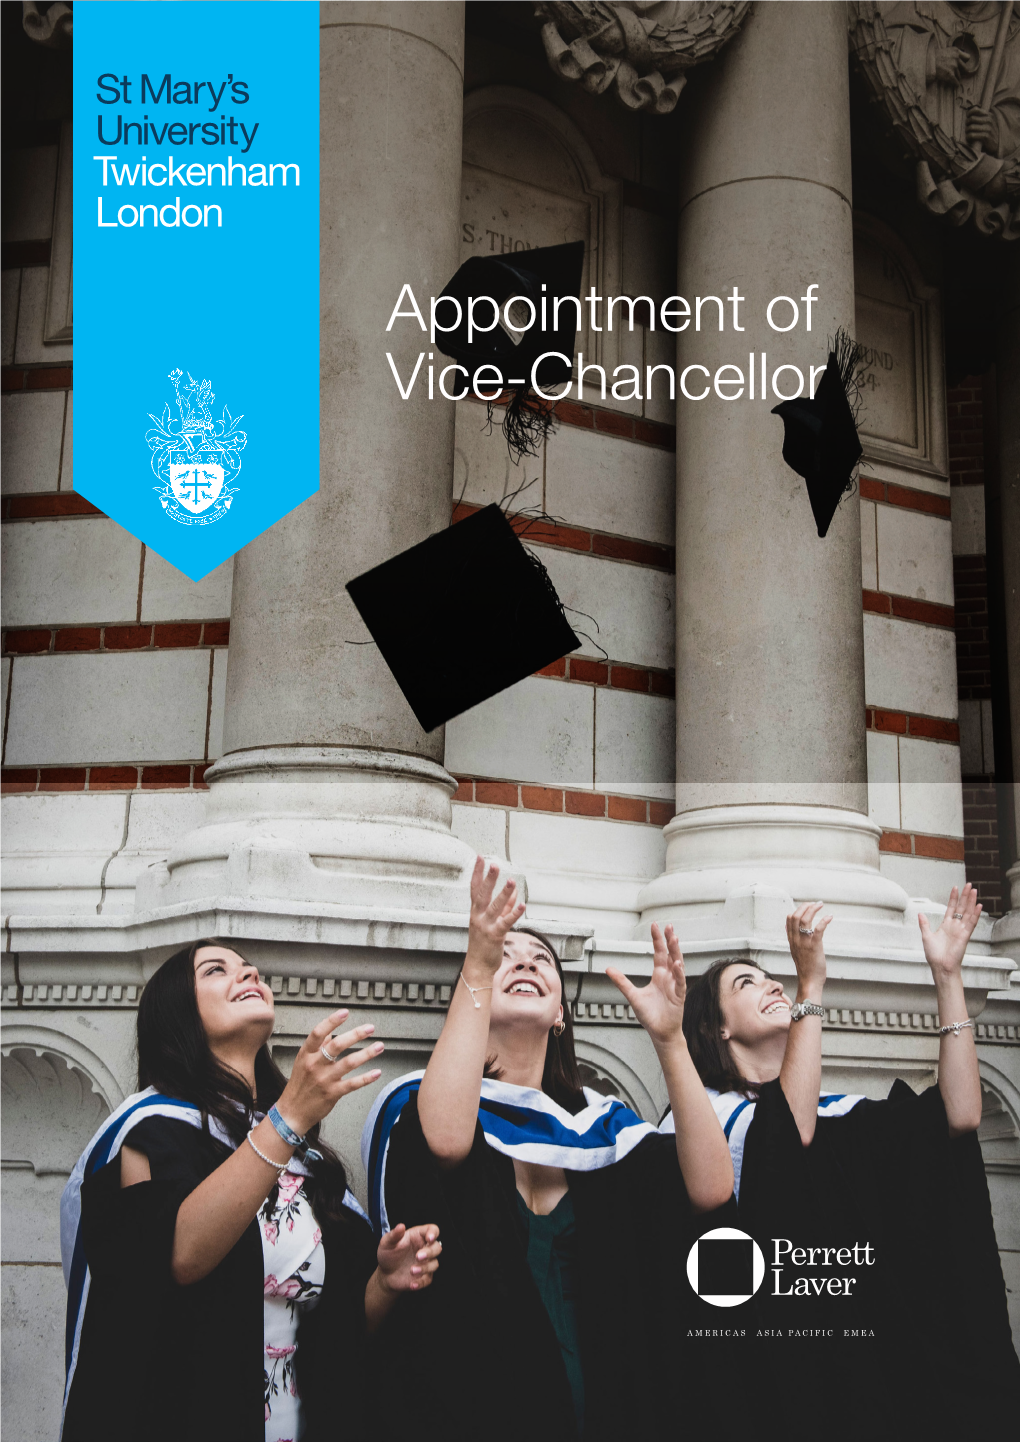 Appointment of Vice-Chancellor Contents